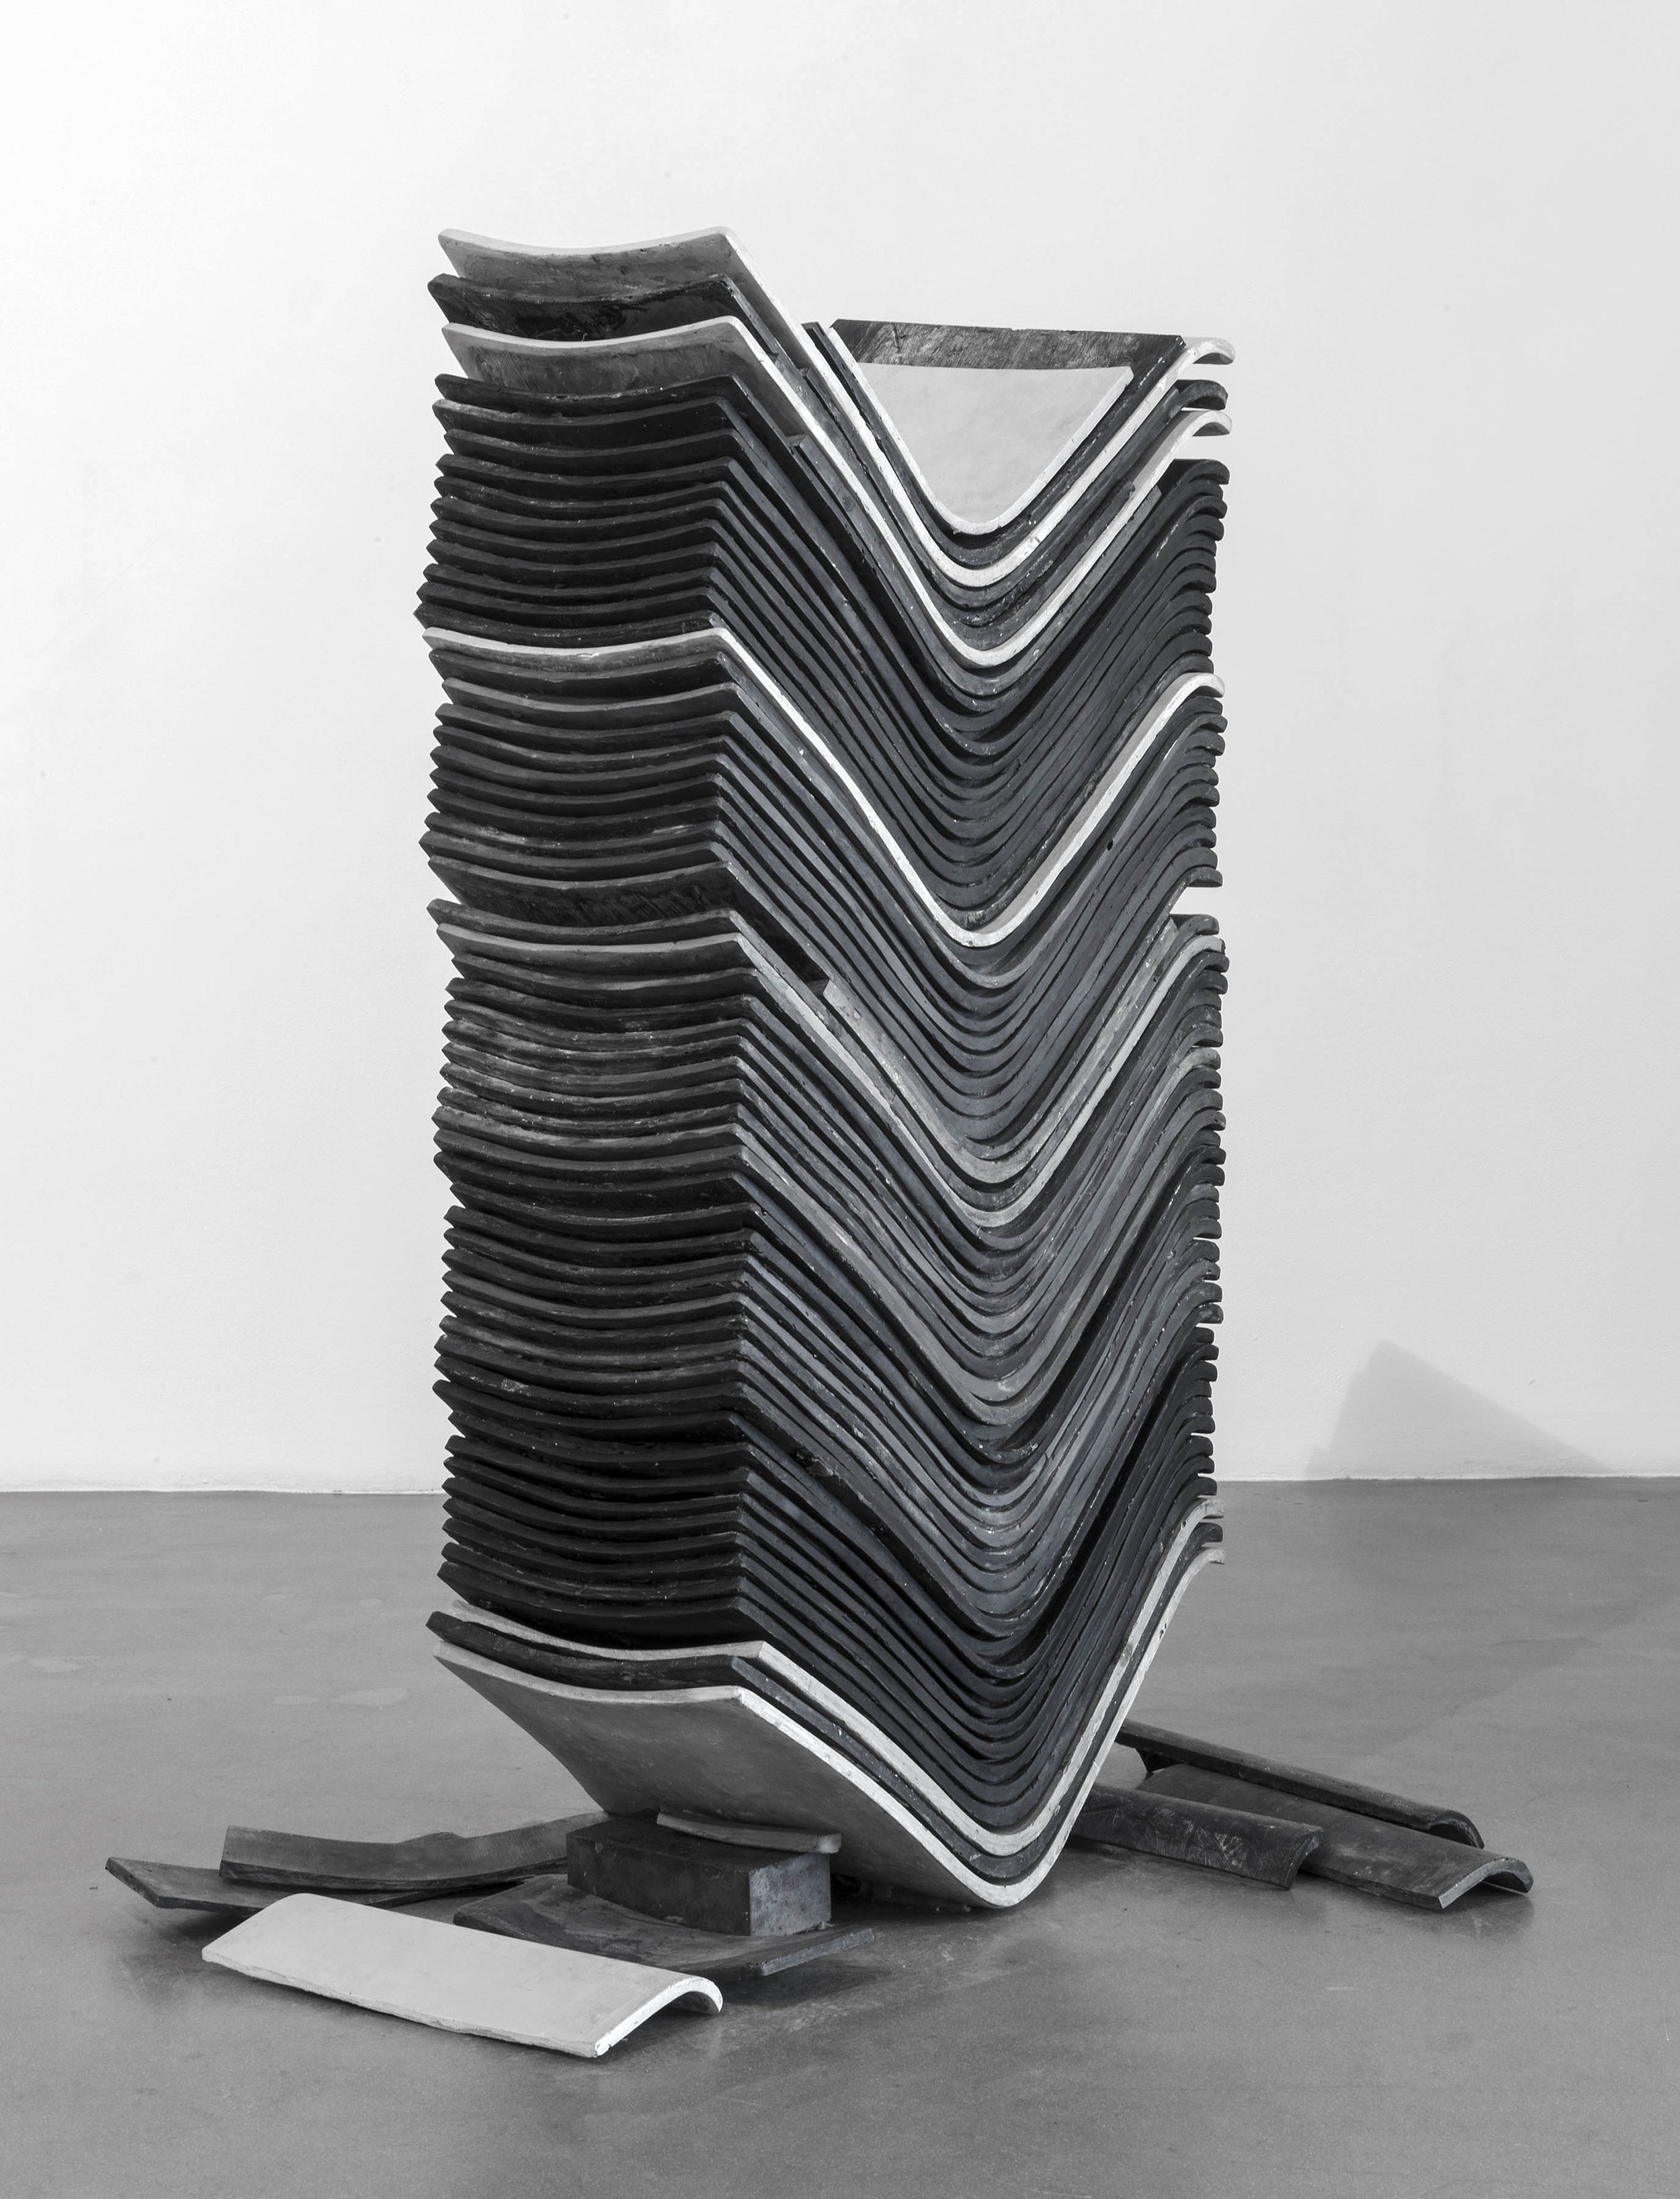  untitled (stack), 2017 stackable office chair seats cast in jesmonite and ashes 